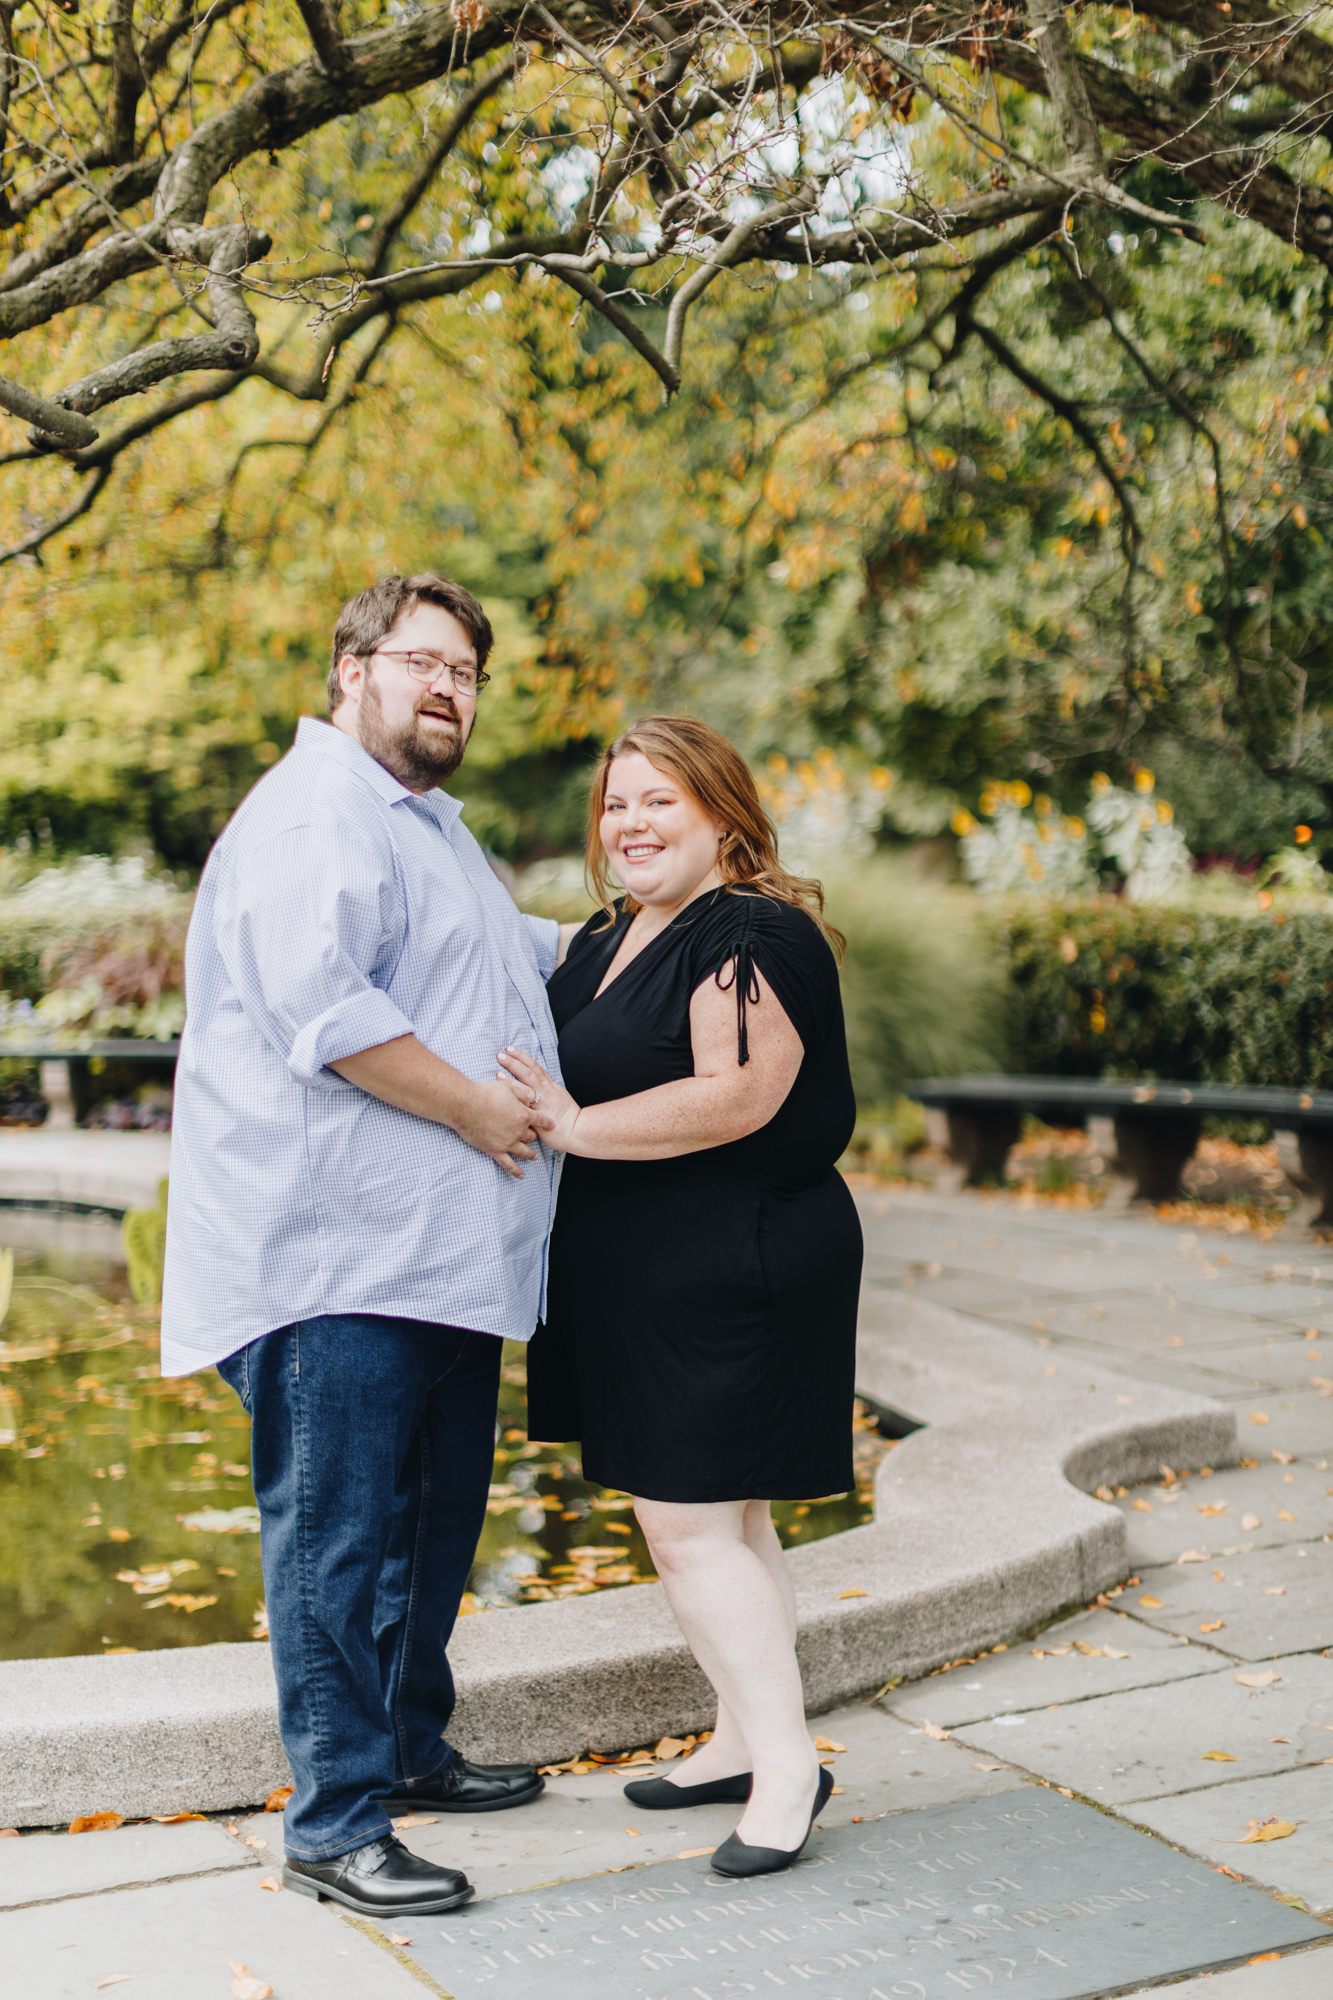 Jaw-Dropping Autumn Conservatory Garden Engagement Photography